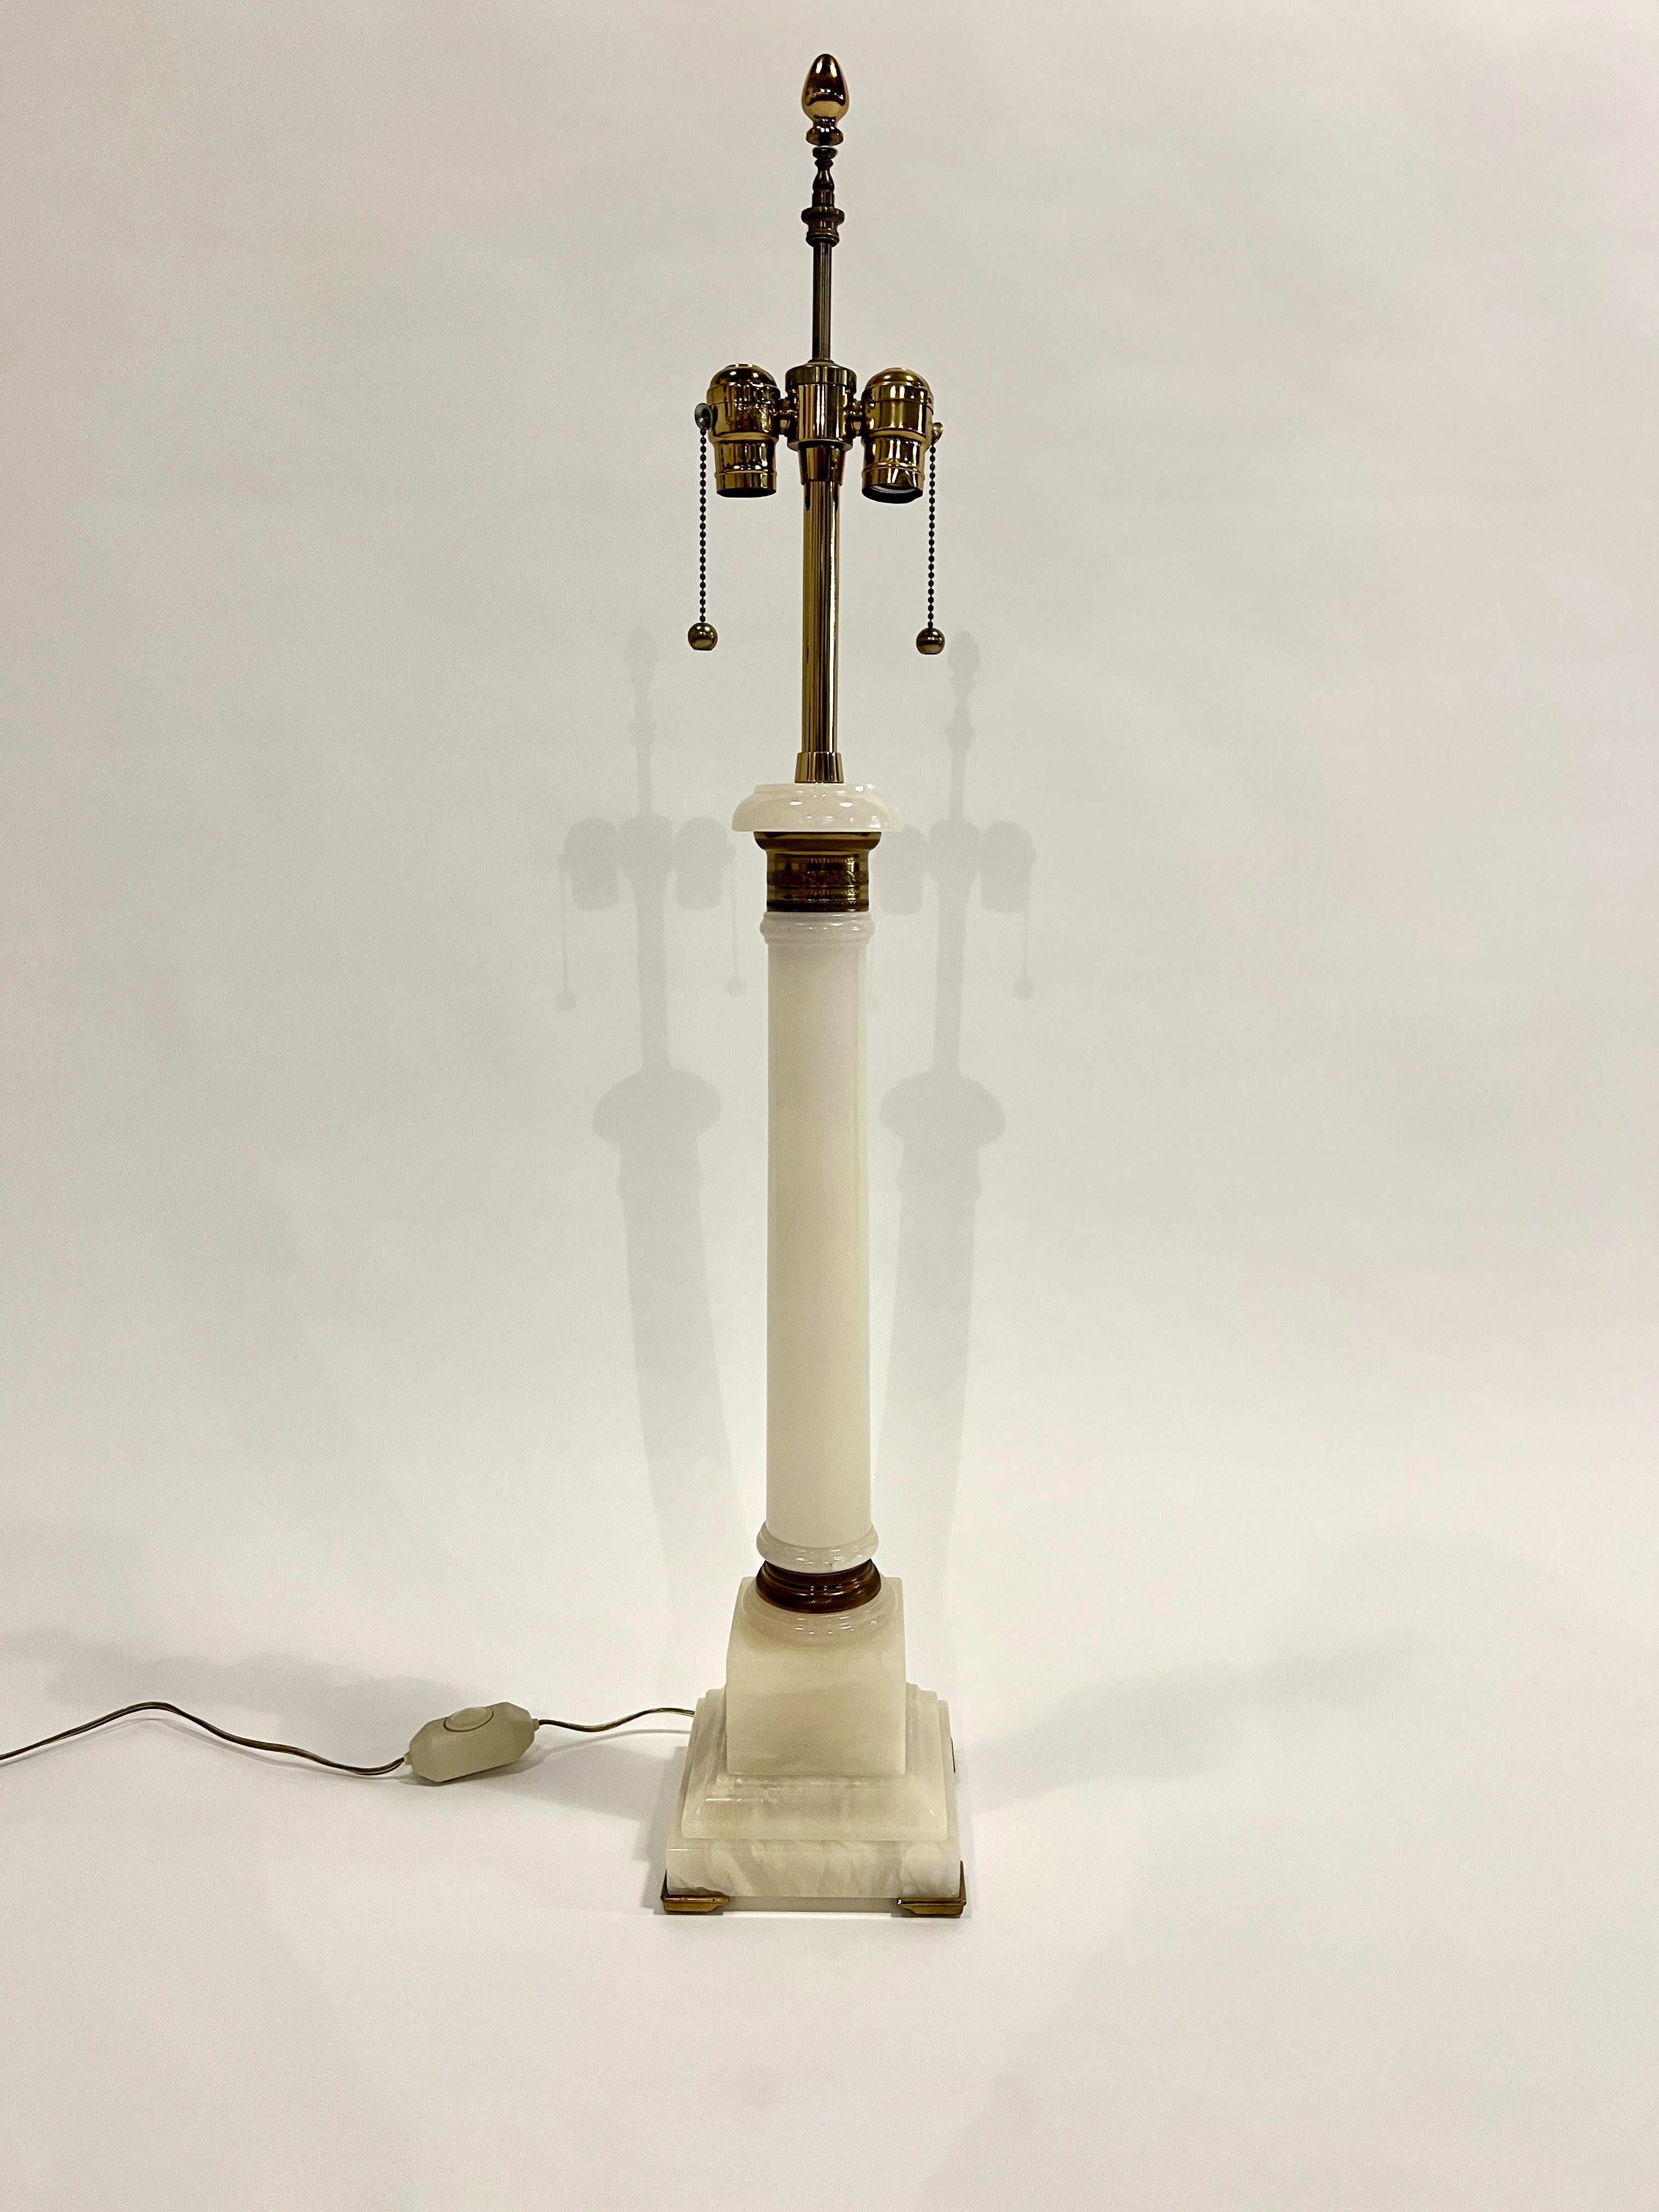 Tall classical column lamp in alabaster and brass accents attributed to Marbo Lamp Co. Comes with original silk lined shade and brass finial.